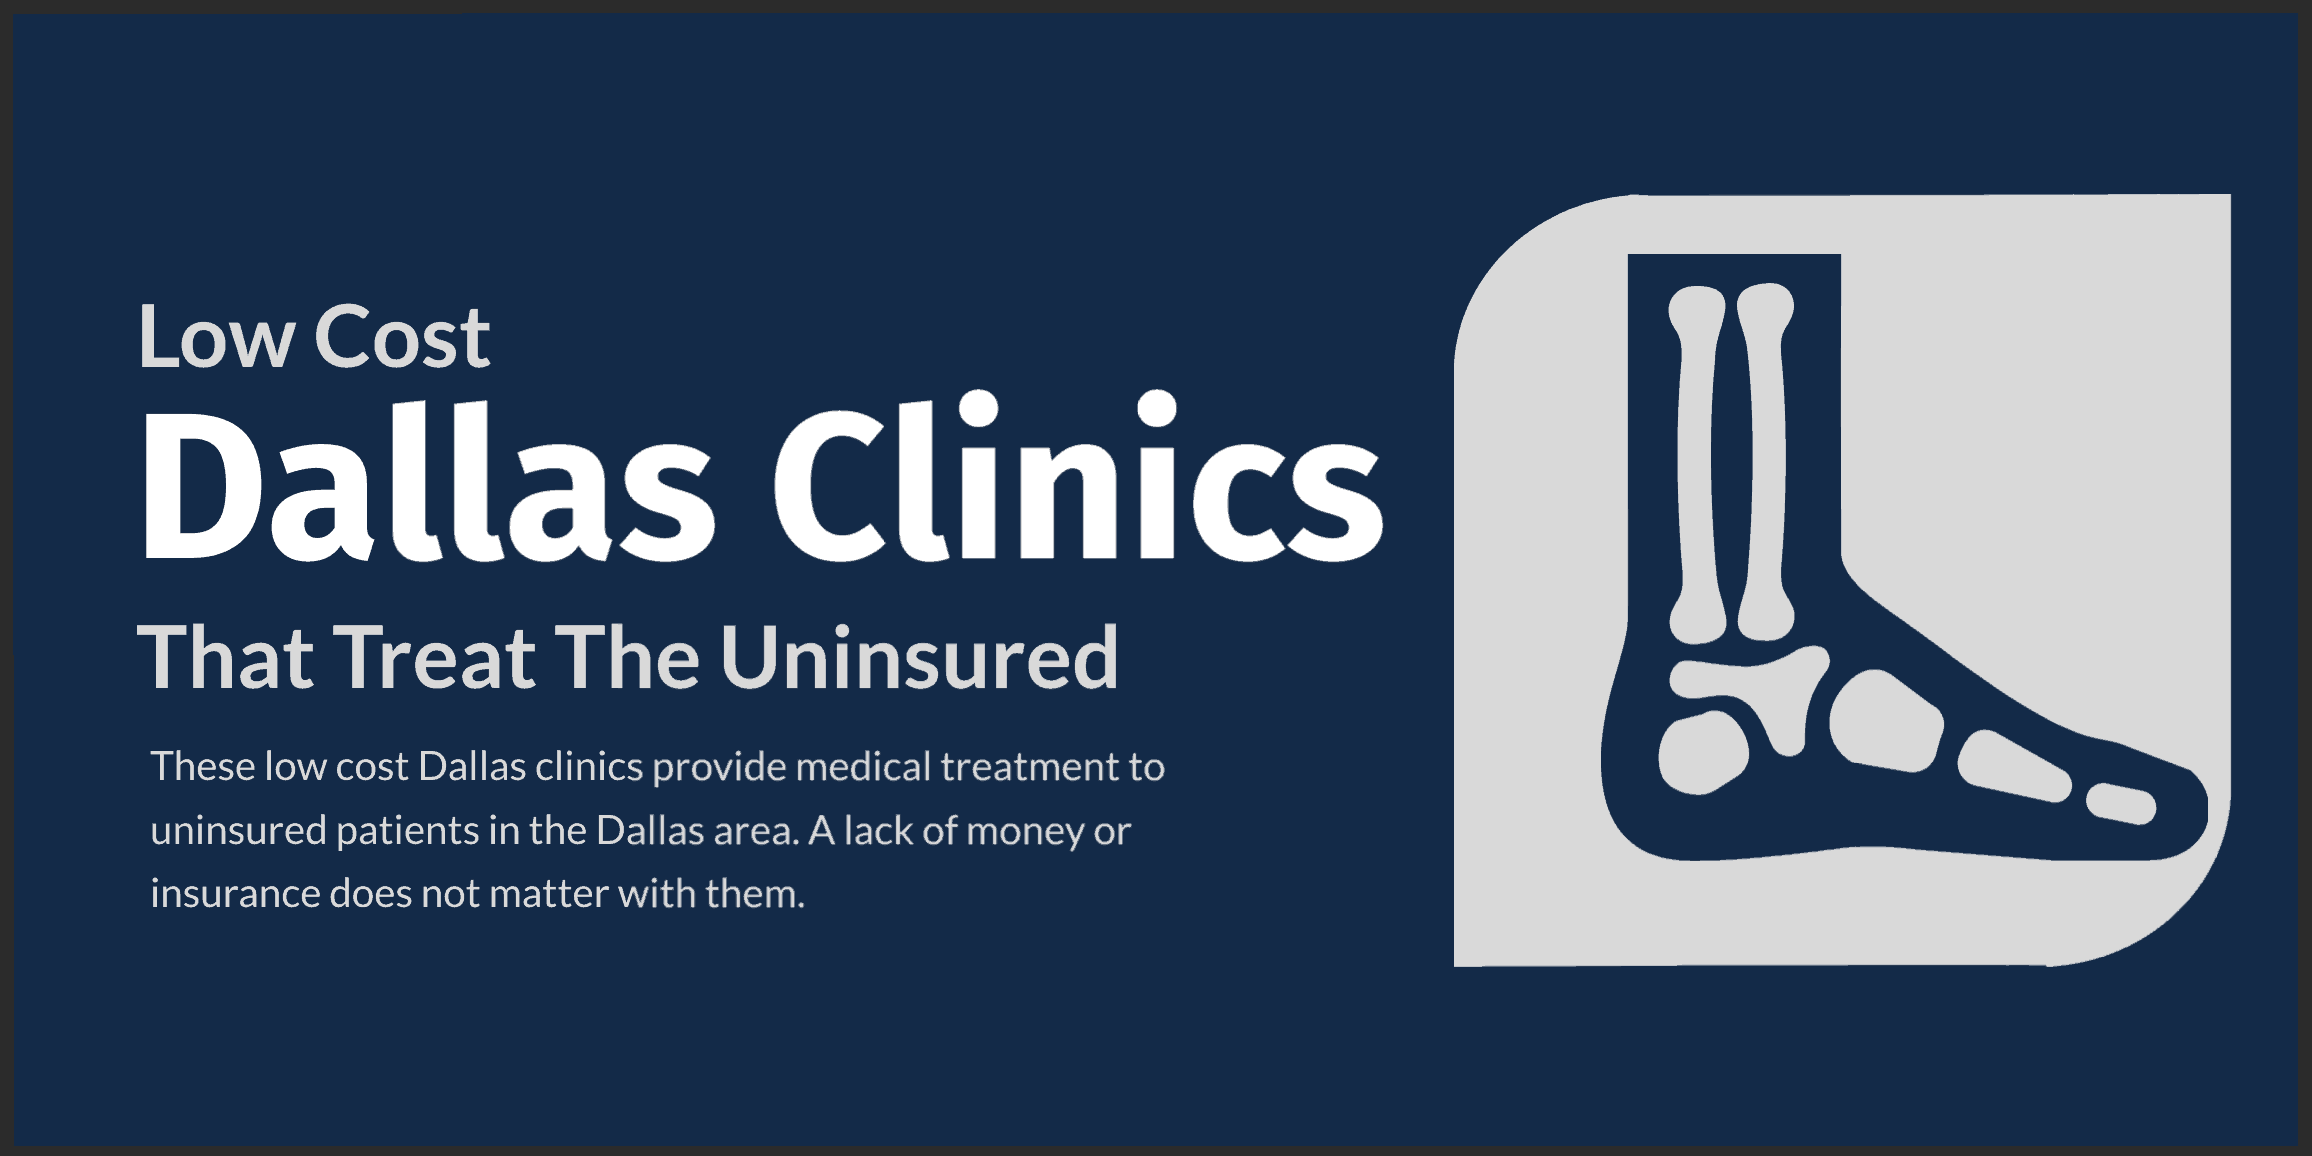 18 Low Cost Dallas Clinics That Treat The Uninsured